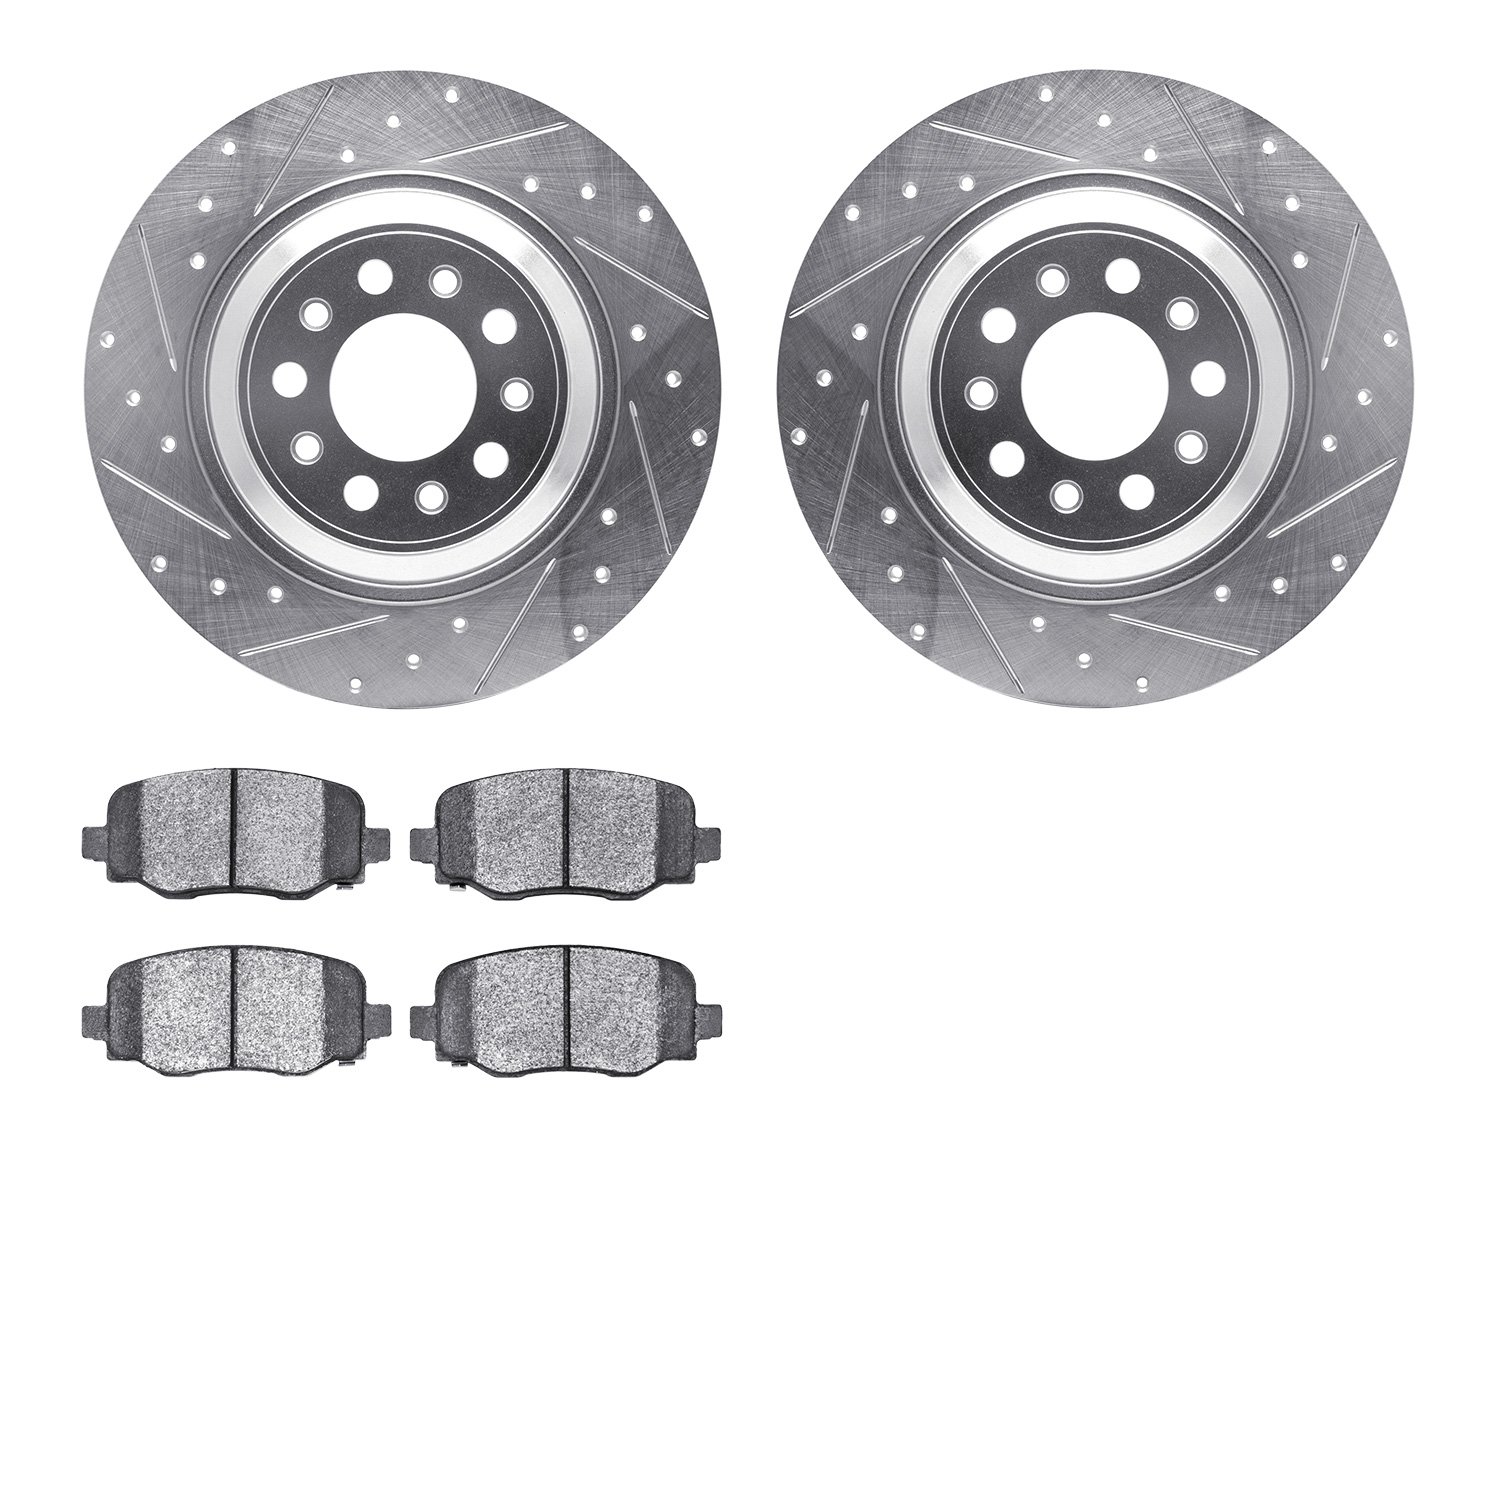 7402-42011 Drilled/Slotted Brake Rotors with Ultimate-Duty Brake Pads Kit [Silver], Fits Select Mopar, Position: Rear